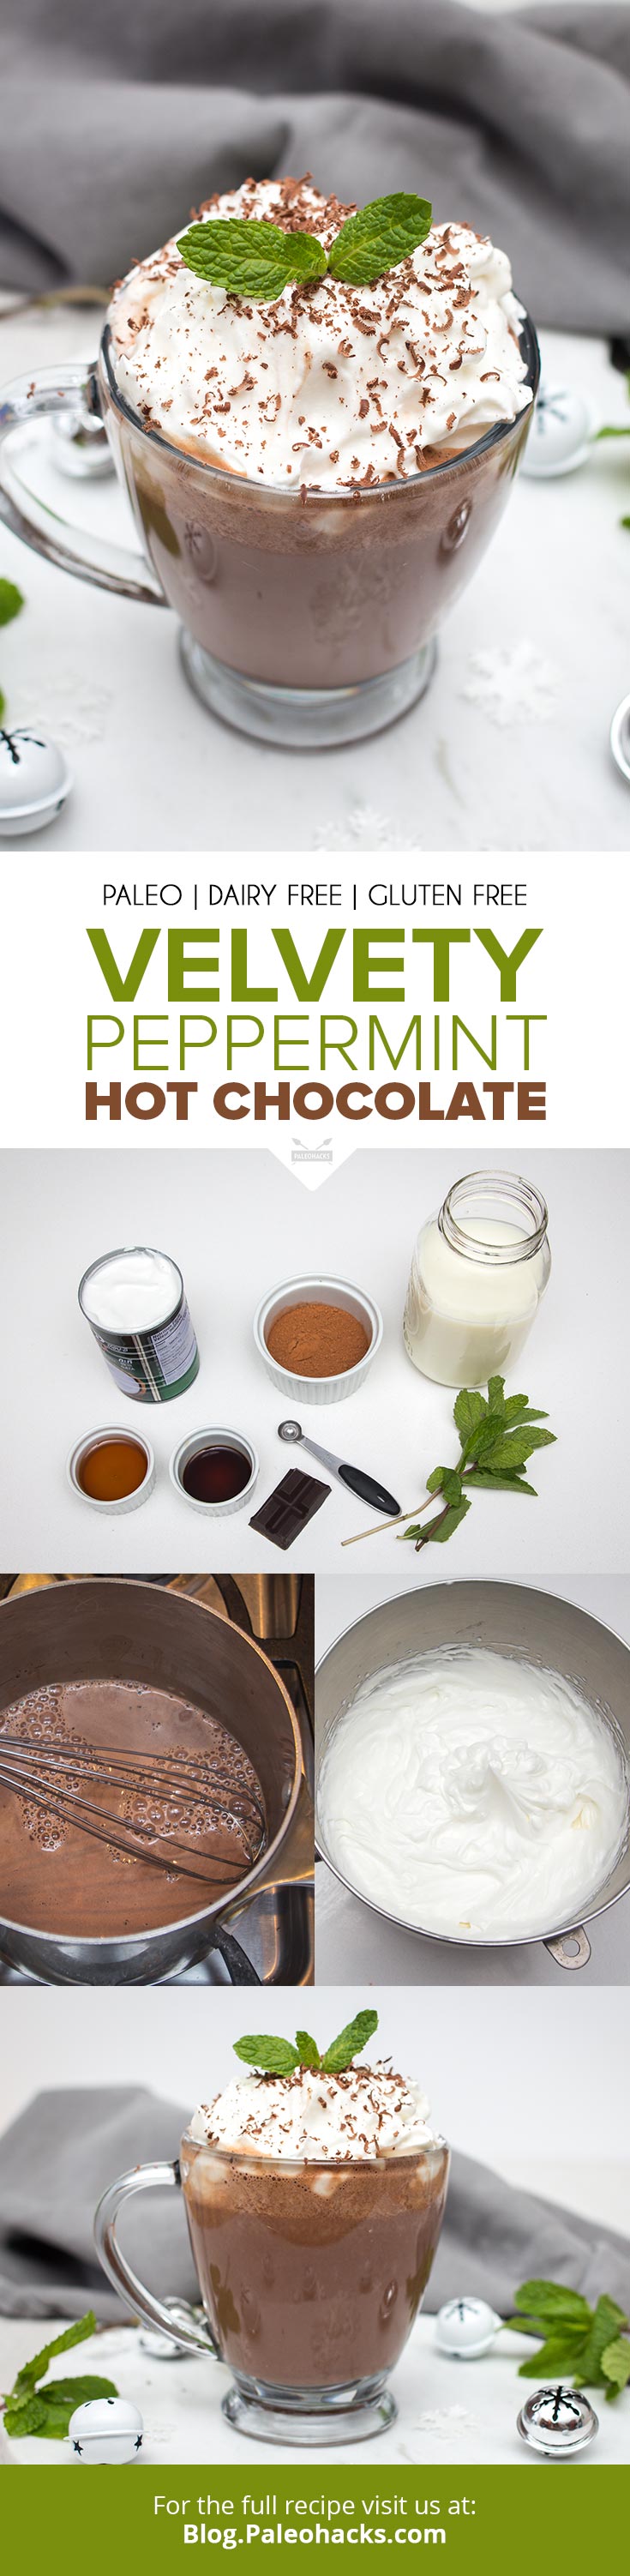 Snuggle up with a cozy blanket, your favorite book, and a mug of this minty hot chocolate. It's the feel-good drink of the winter!